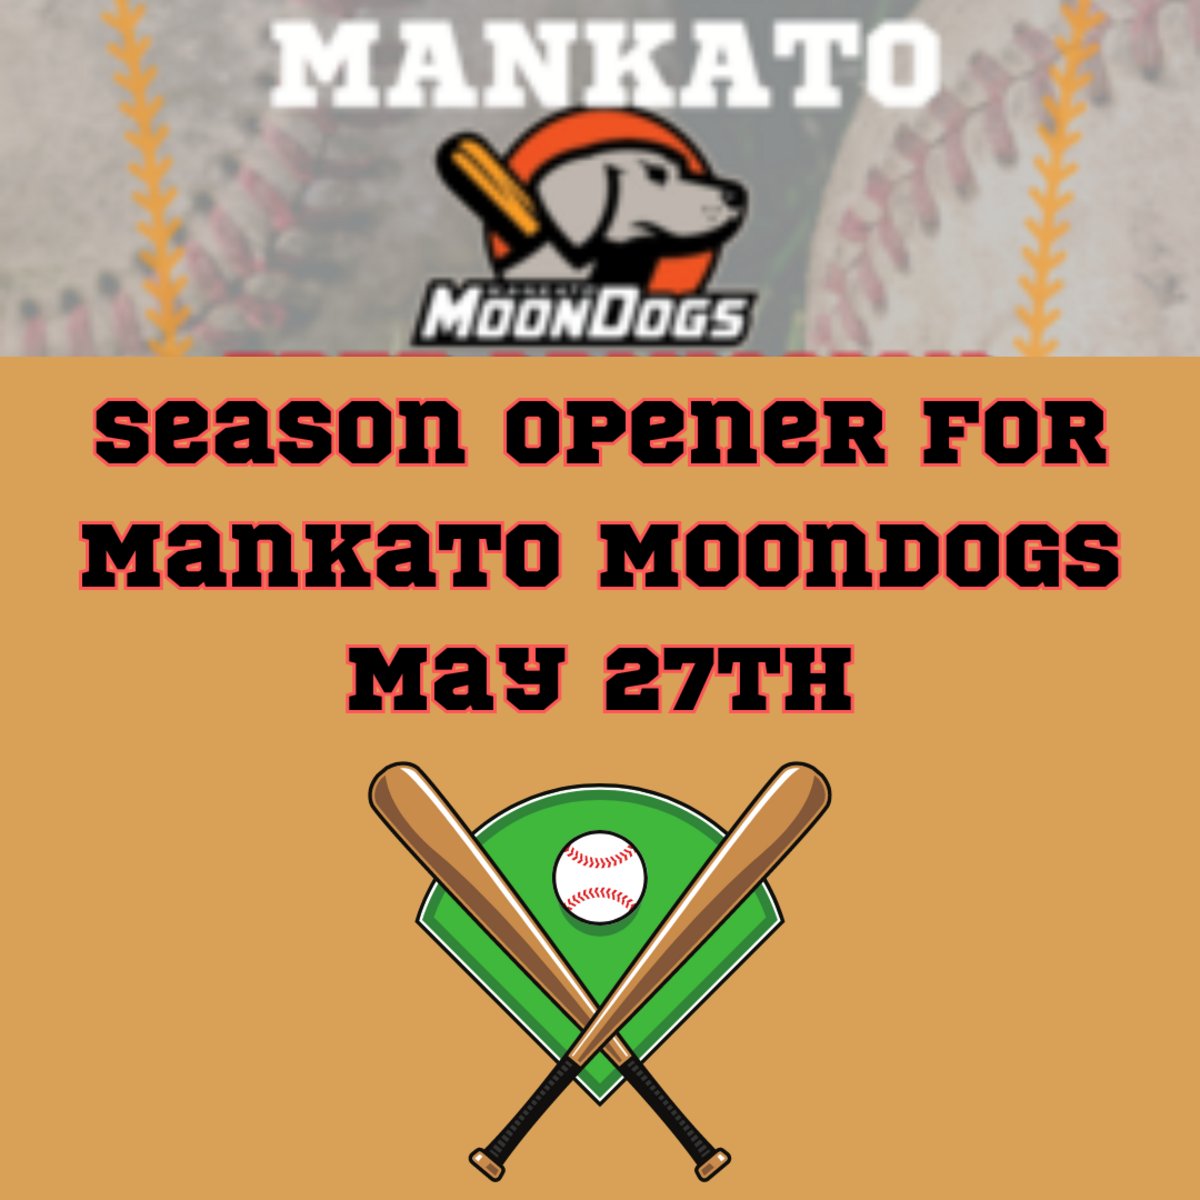 We're excited to see the Mankato Moondogs start their season on May 27th and thrilled to offer 15% off your stay with 4 dog pound tickets while supplies last! ⚾ Book today! bit.ly/3QzHH4L #seasonopener #Mankato #Moondogs